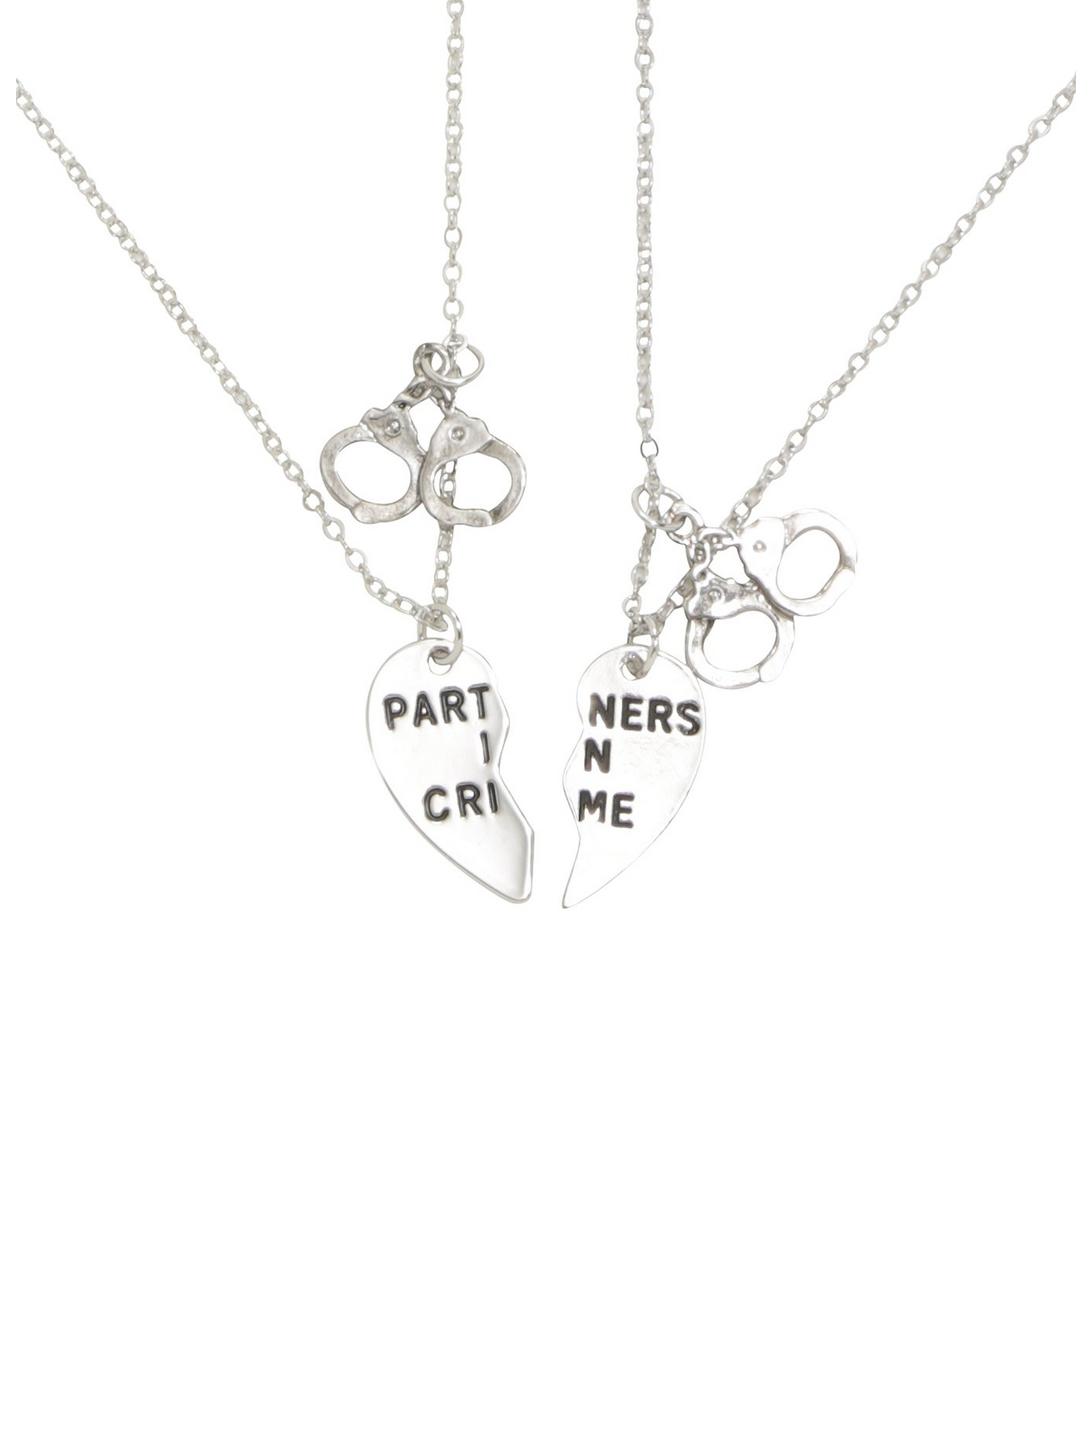 Blackheart Partners In Crime Handcuffs Heart BFF Necklace Set, , hi-res